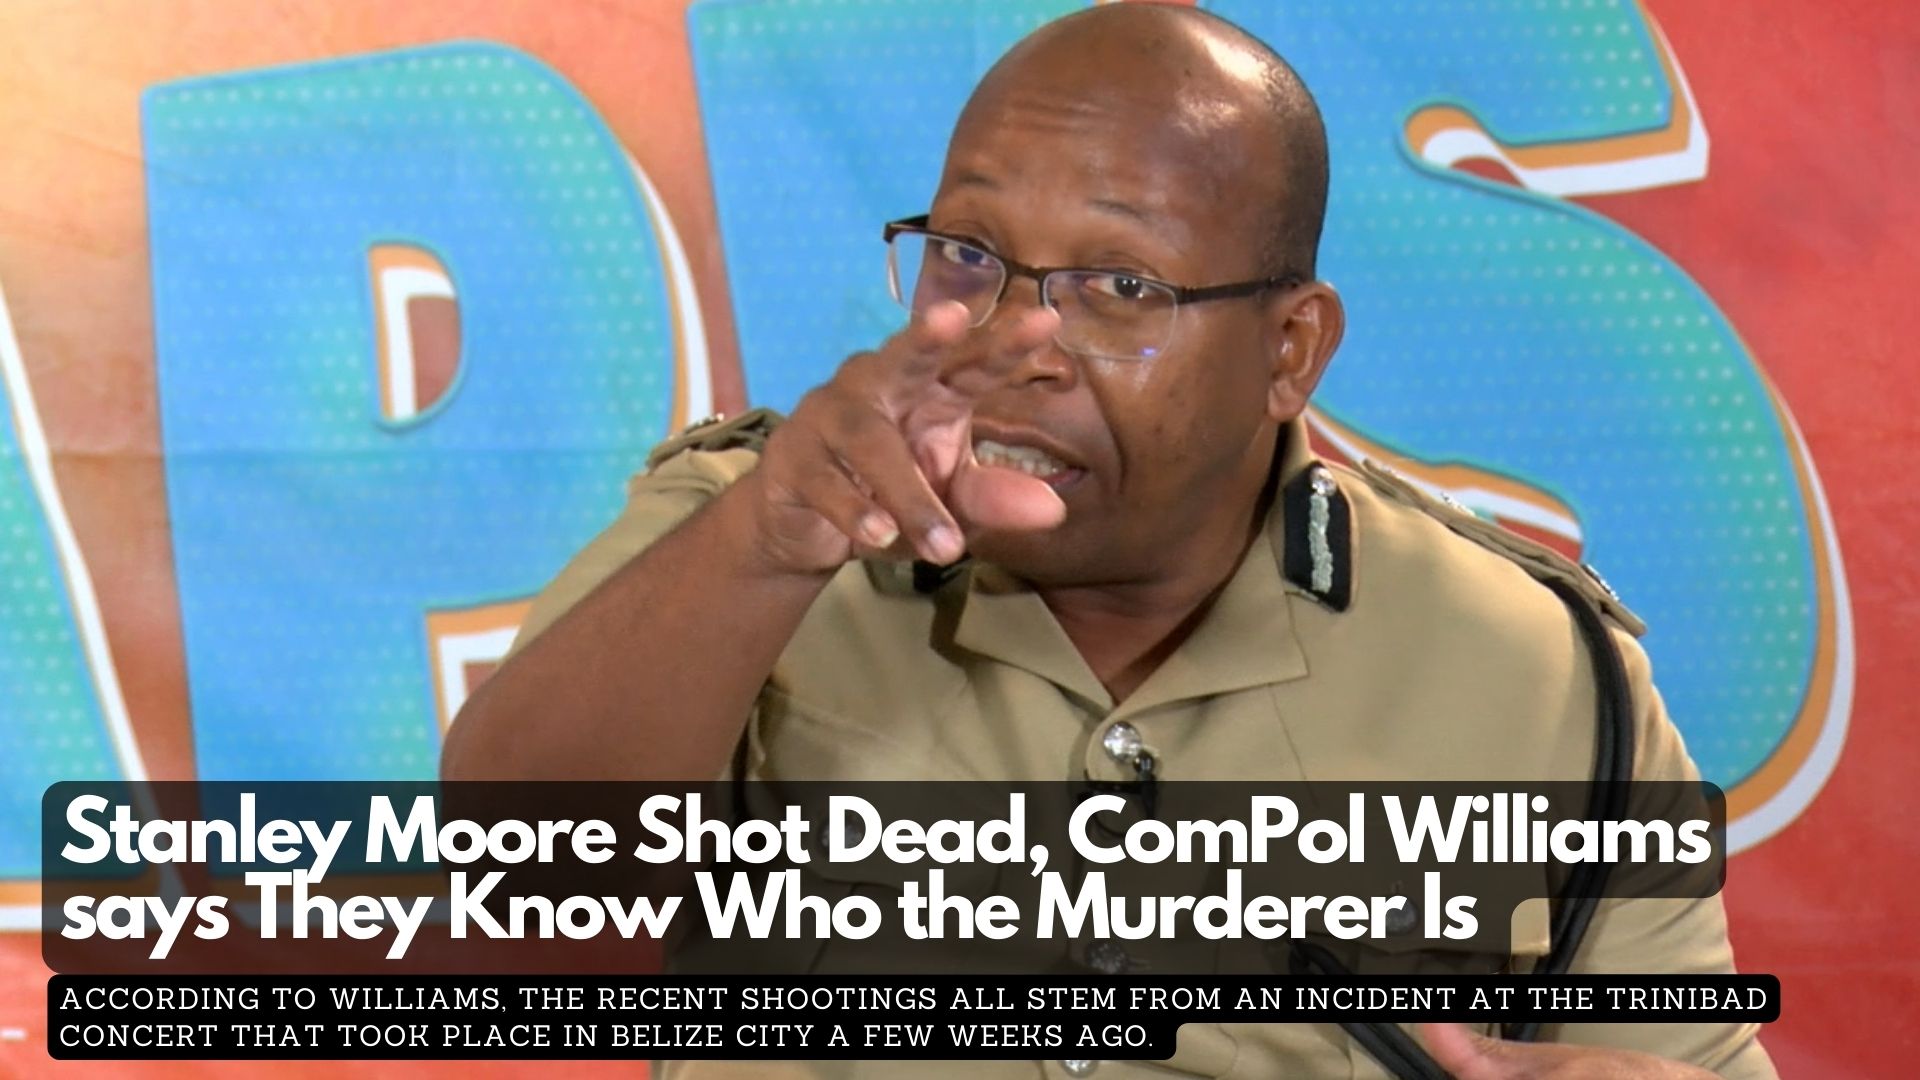 Stanley Moore Shot Dead, ComPol Williams says They Know Who the Murderer Is